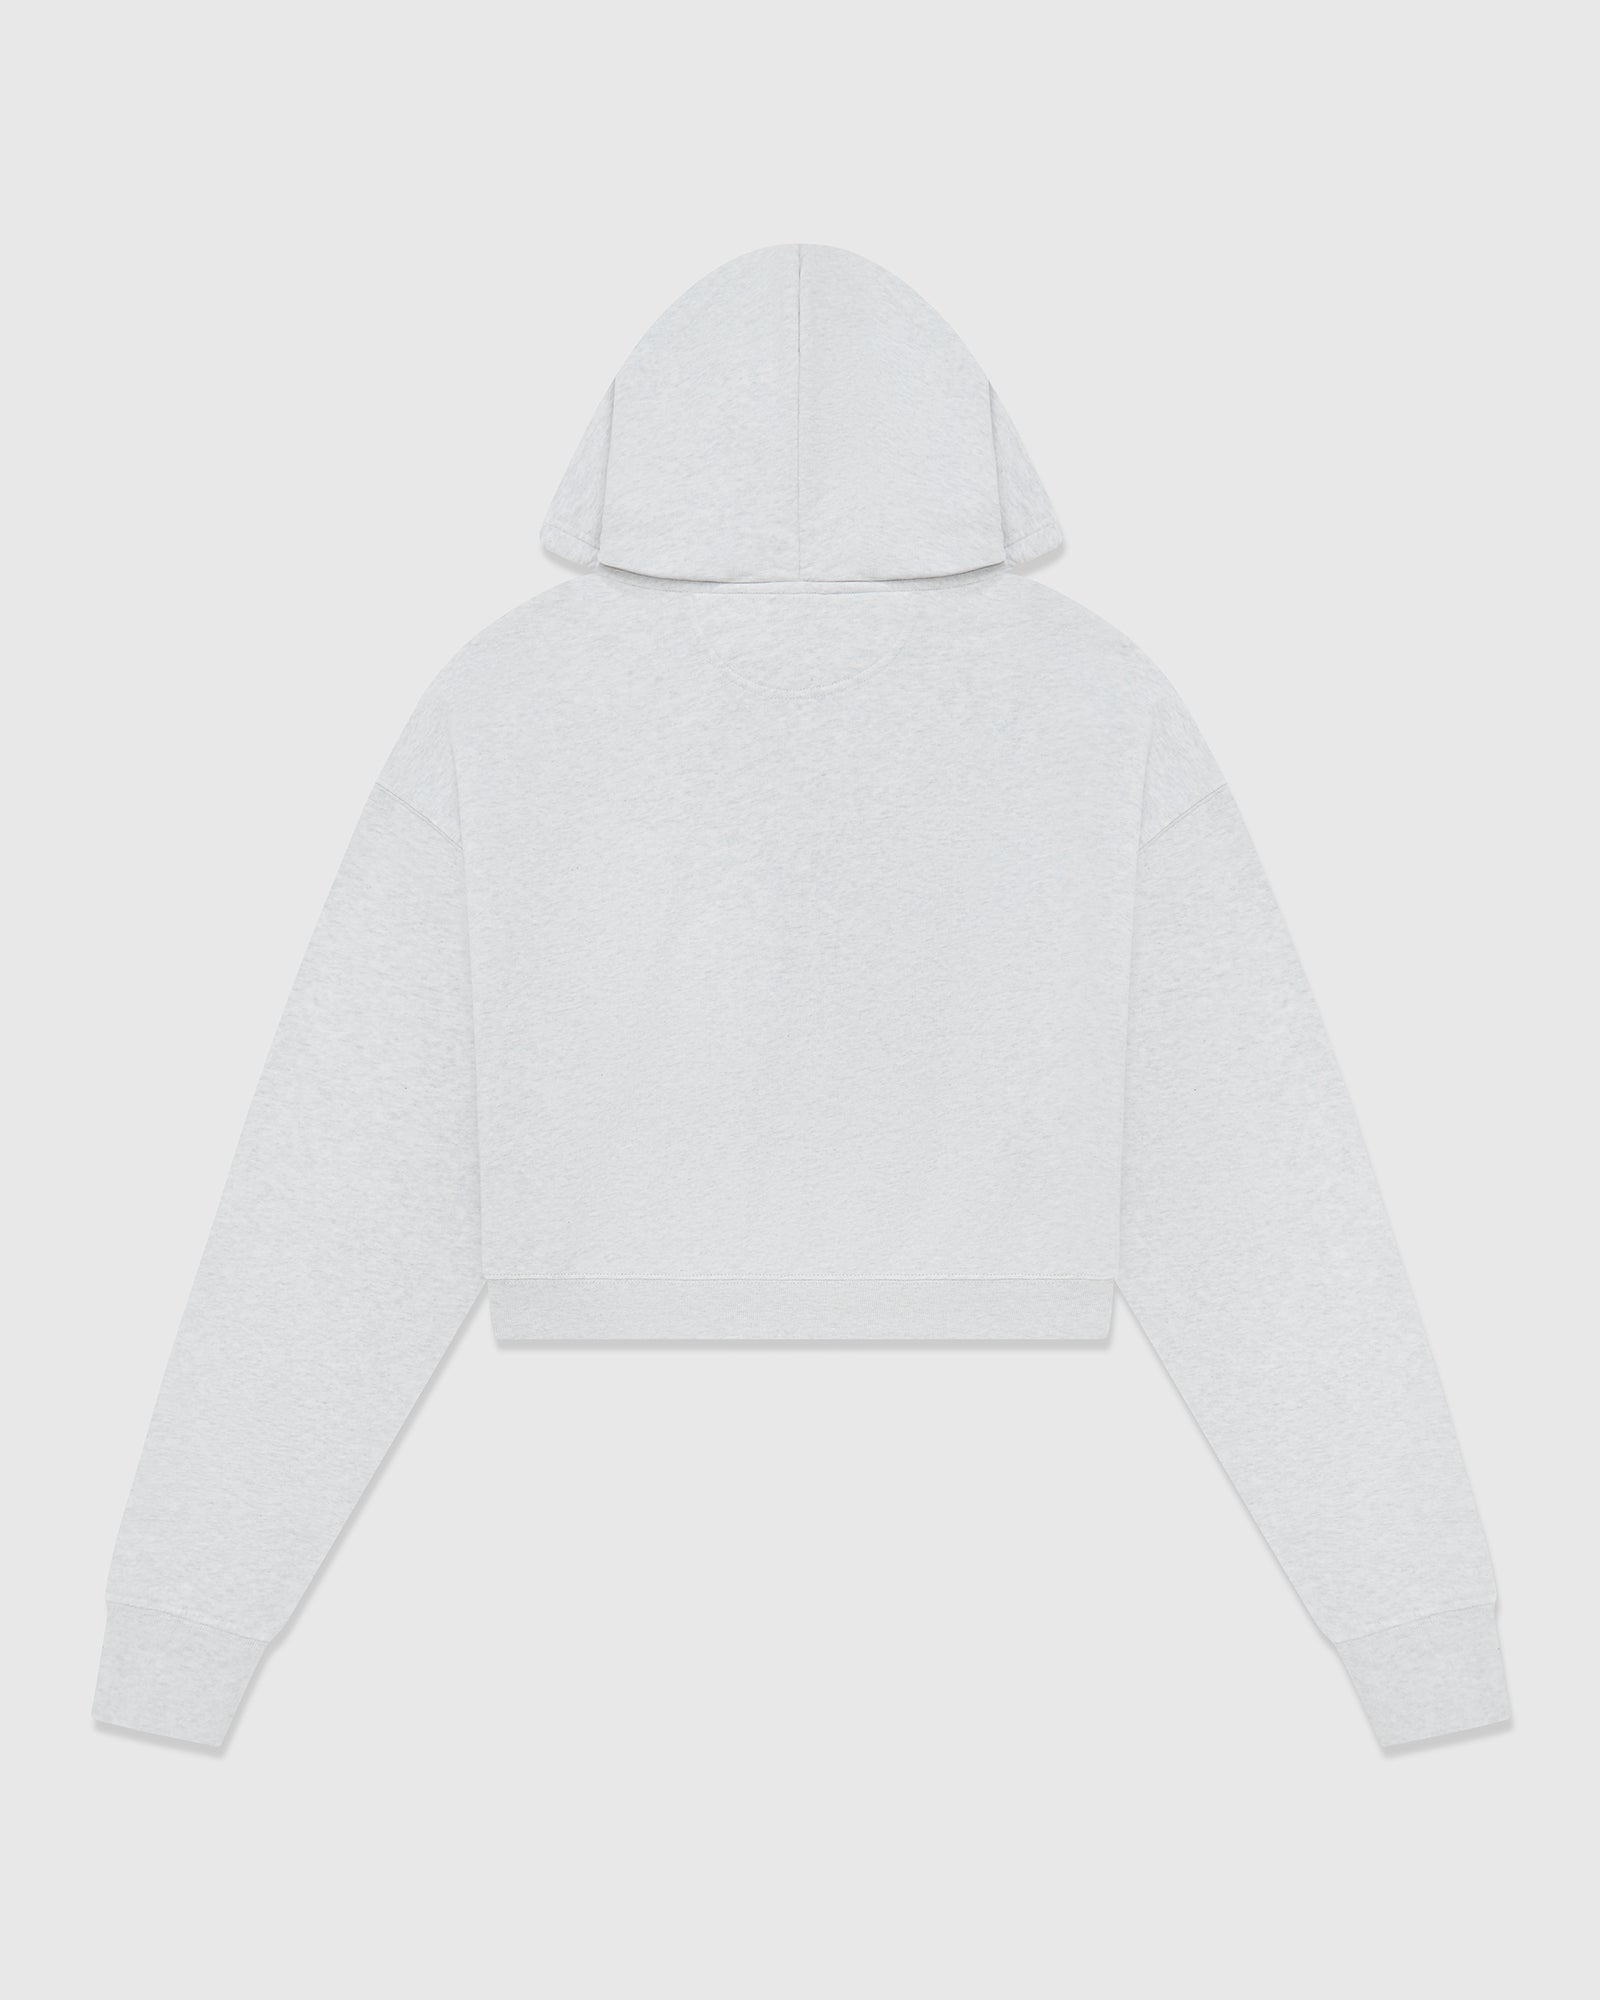 Cropped Hoodie - Heather Grey - October's Very Own